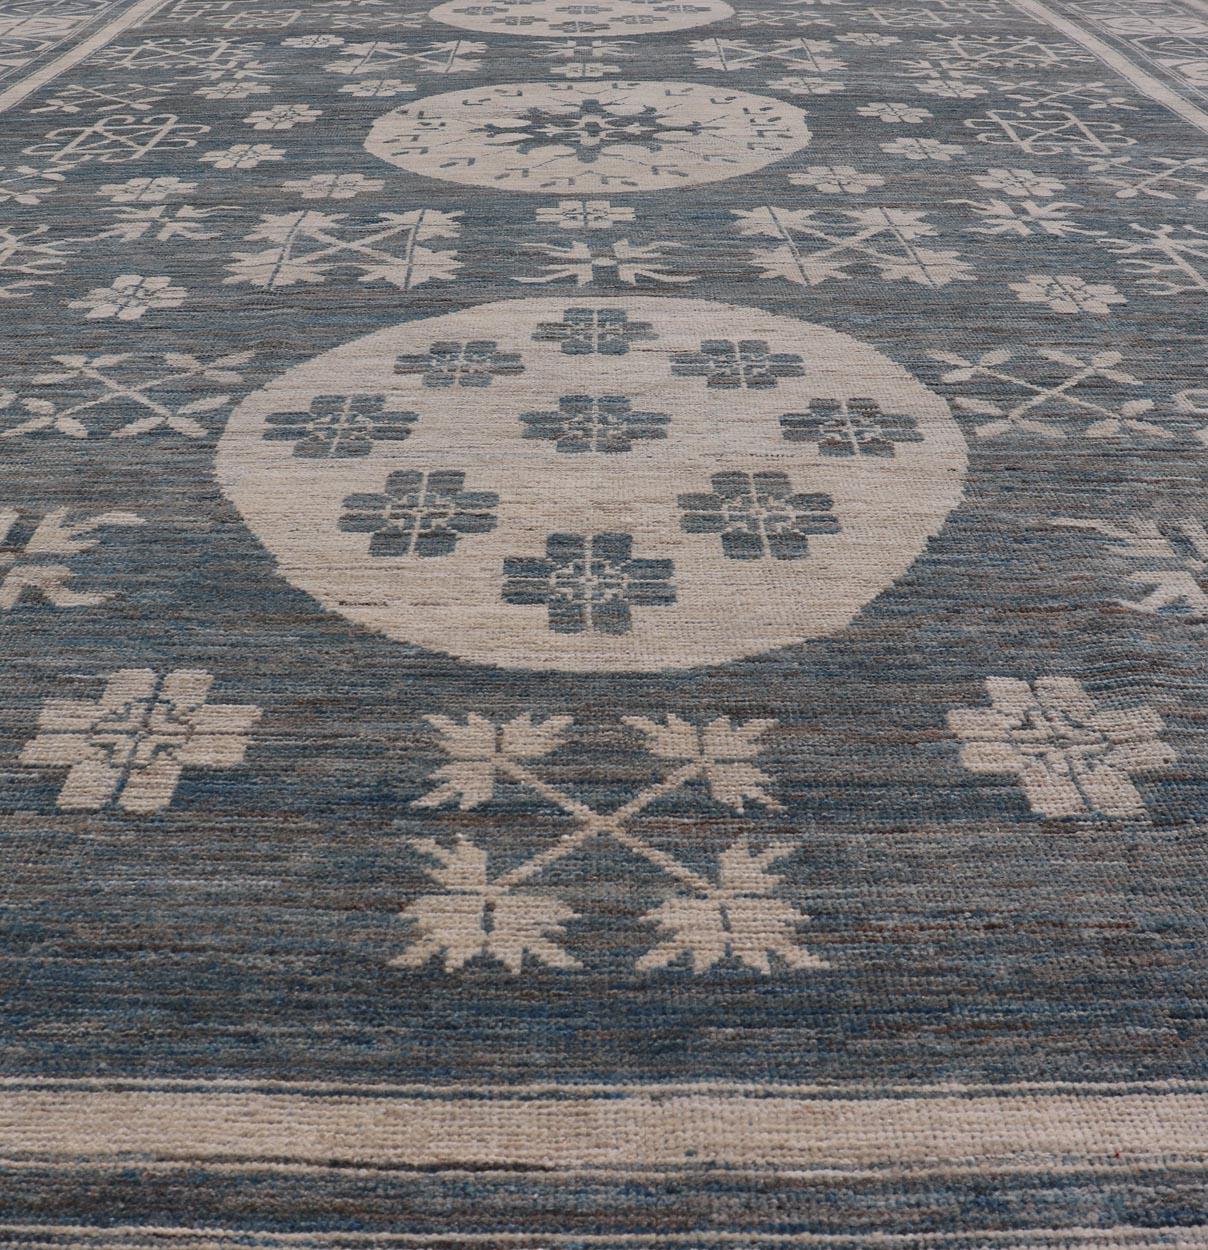 Modern Khotan Rug with Circular Medallions in Shades of Steel Blue & off White For Sale 6